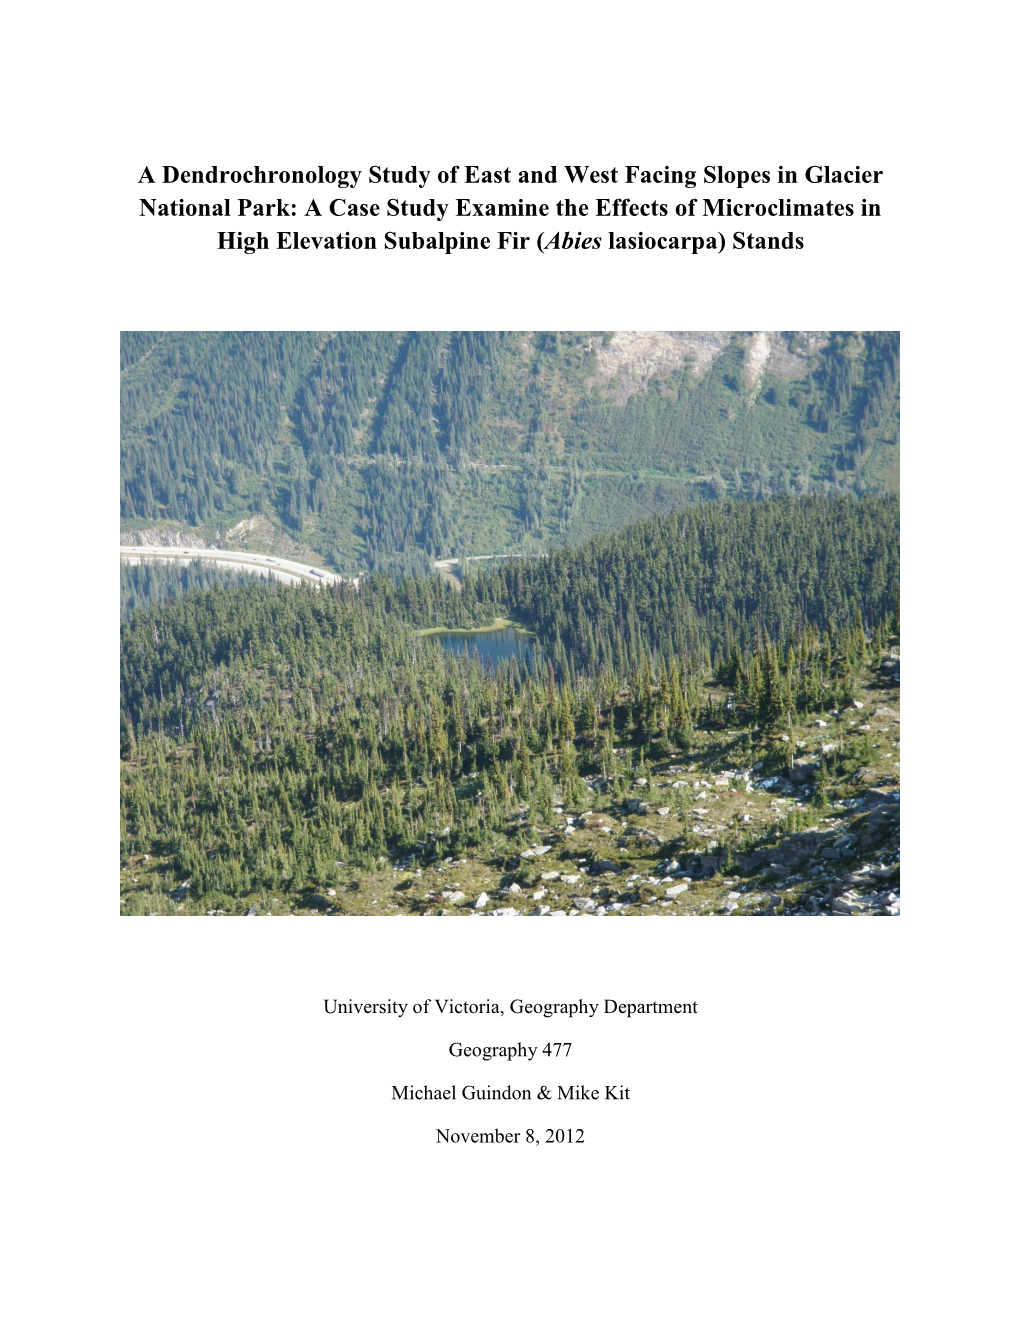 A Dendrochronology Study of East and West Facing Slopes in Glacier